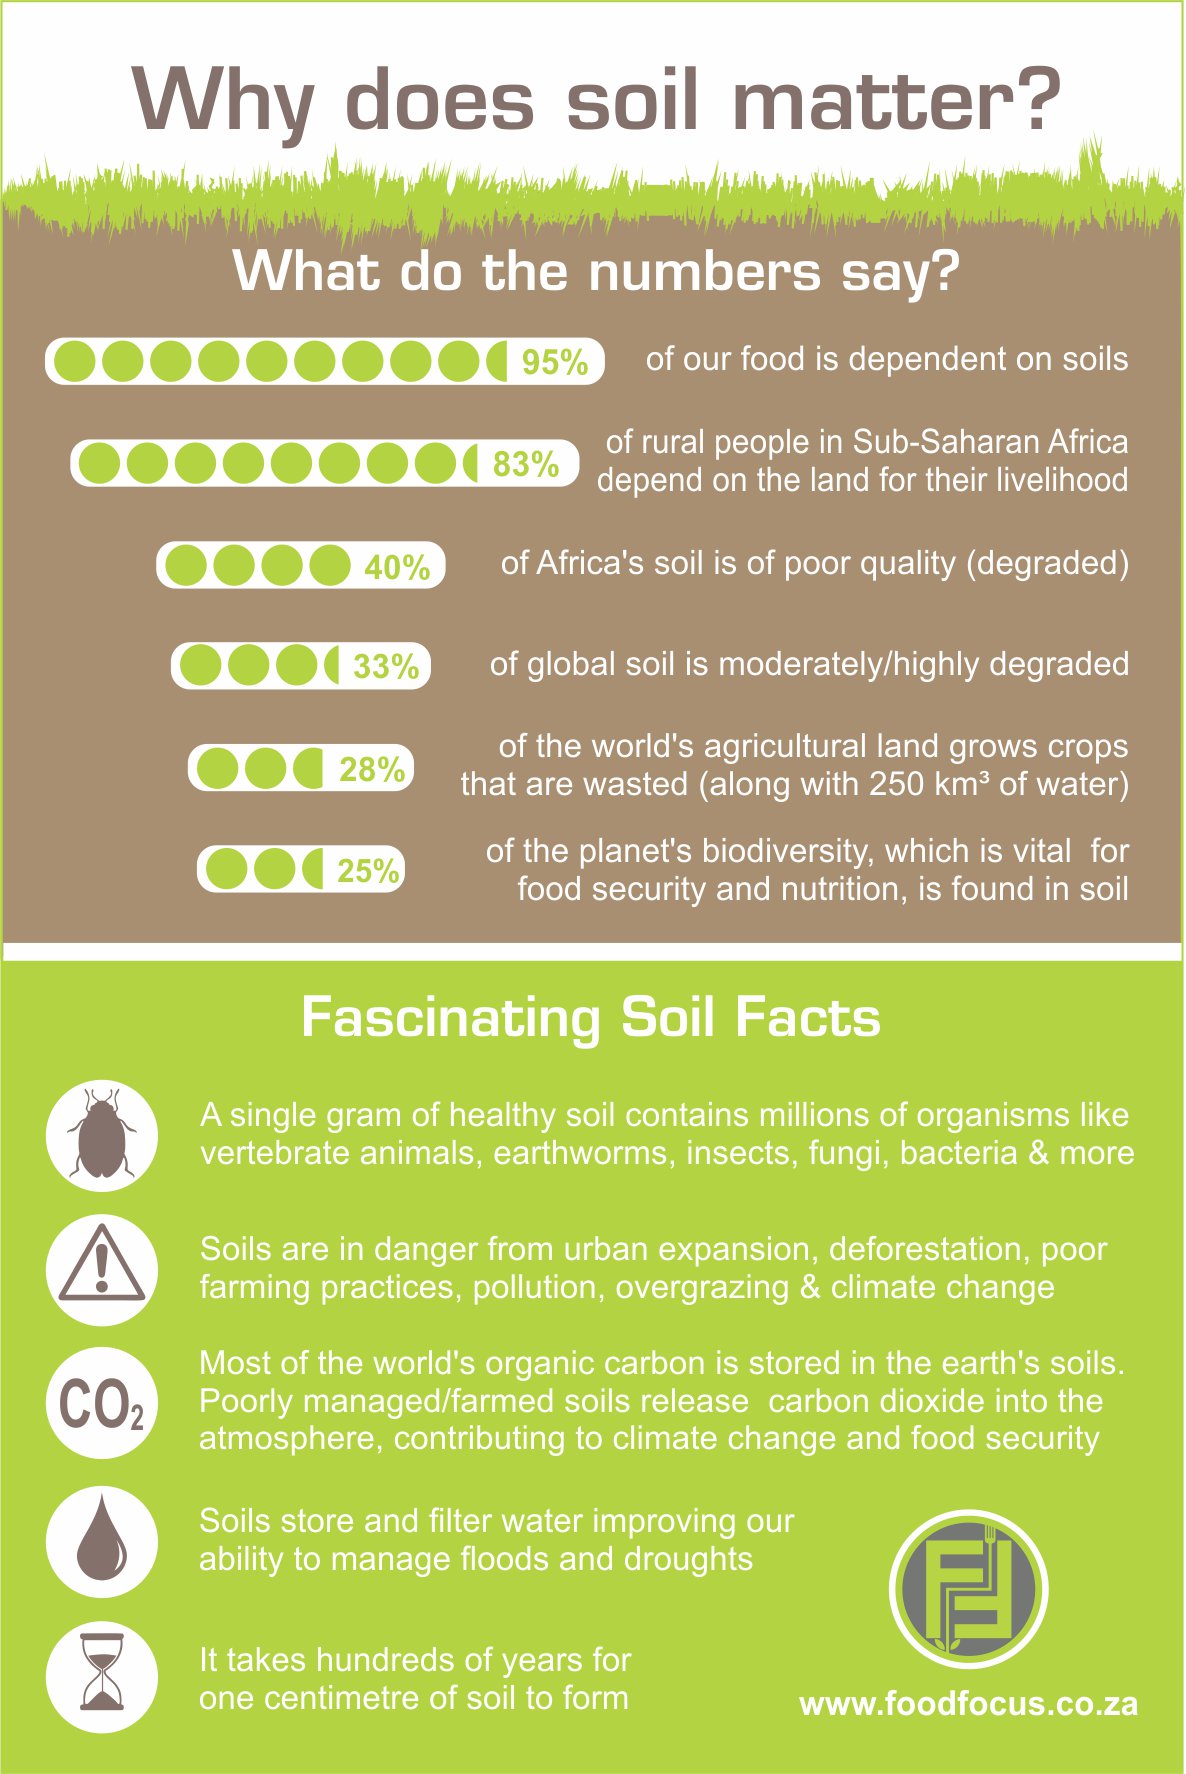 Why does soil matter (Infographic)